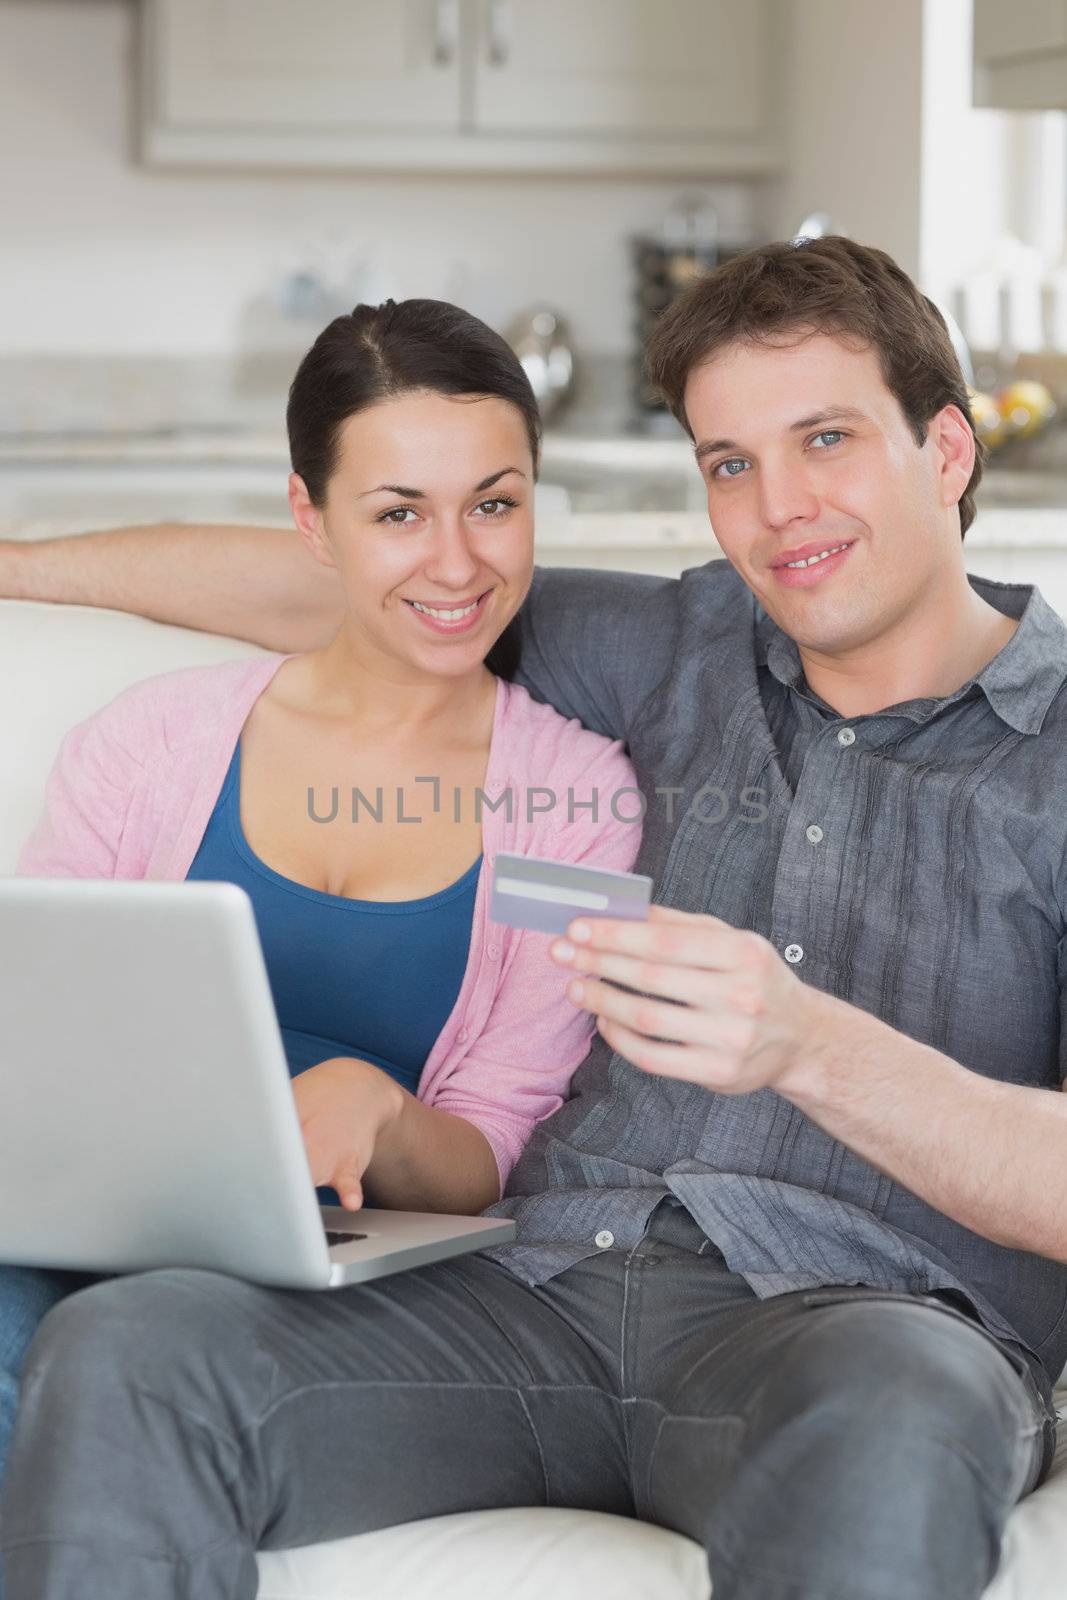 Two people using the laptop on the couch by Wavebreakmedia